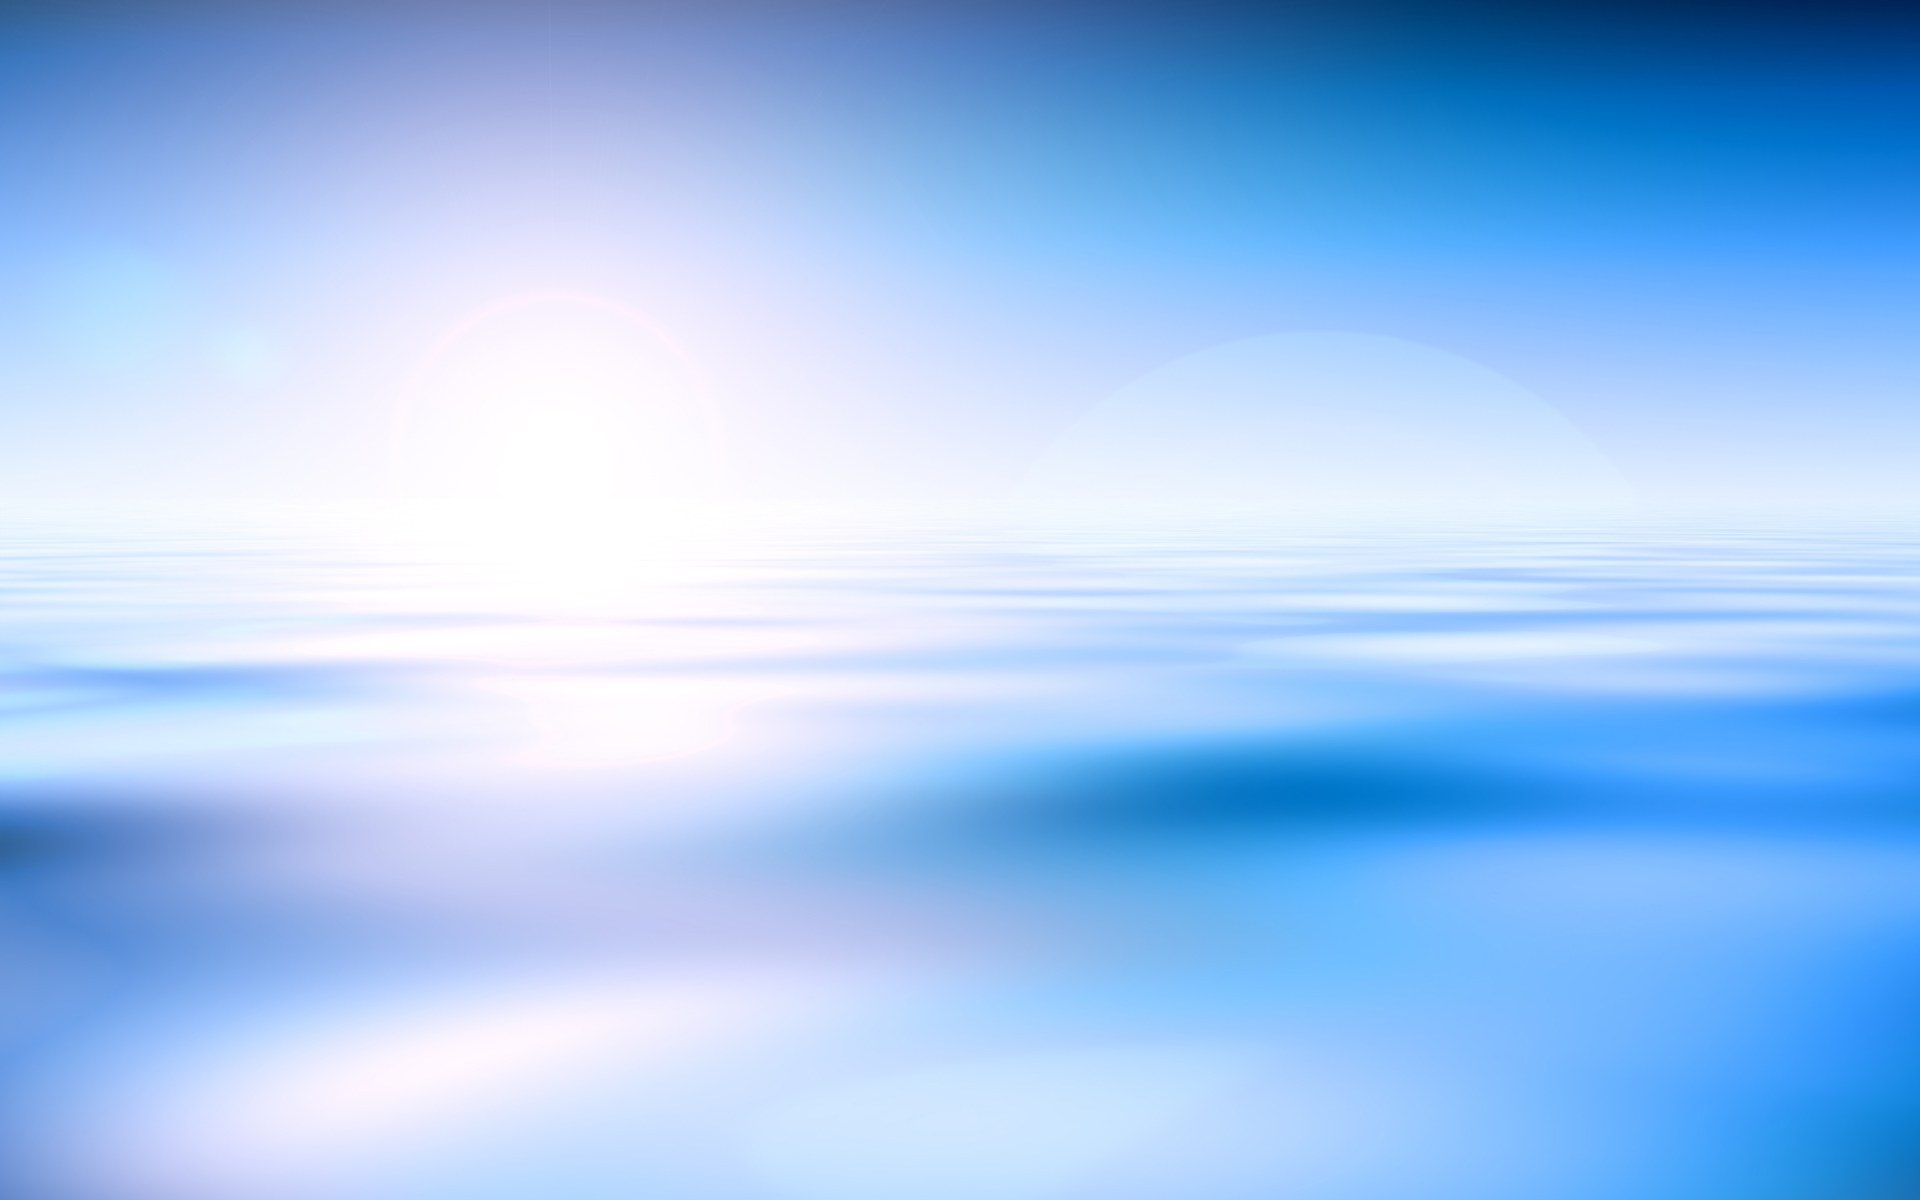 Abstract Backgrounds Blue 4007 Hd Wallpapers in Abstract   Imagesci